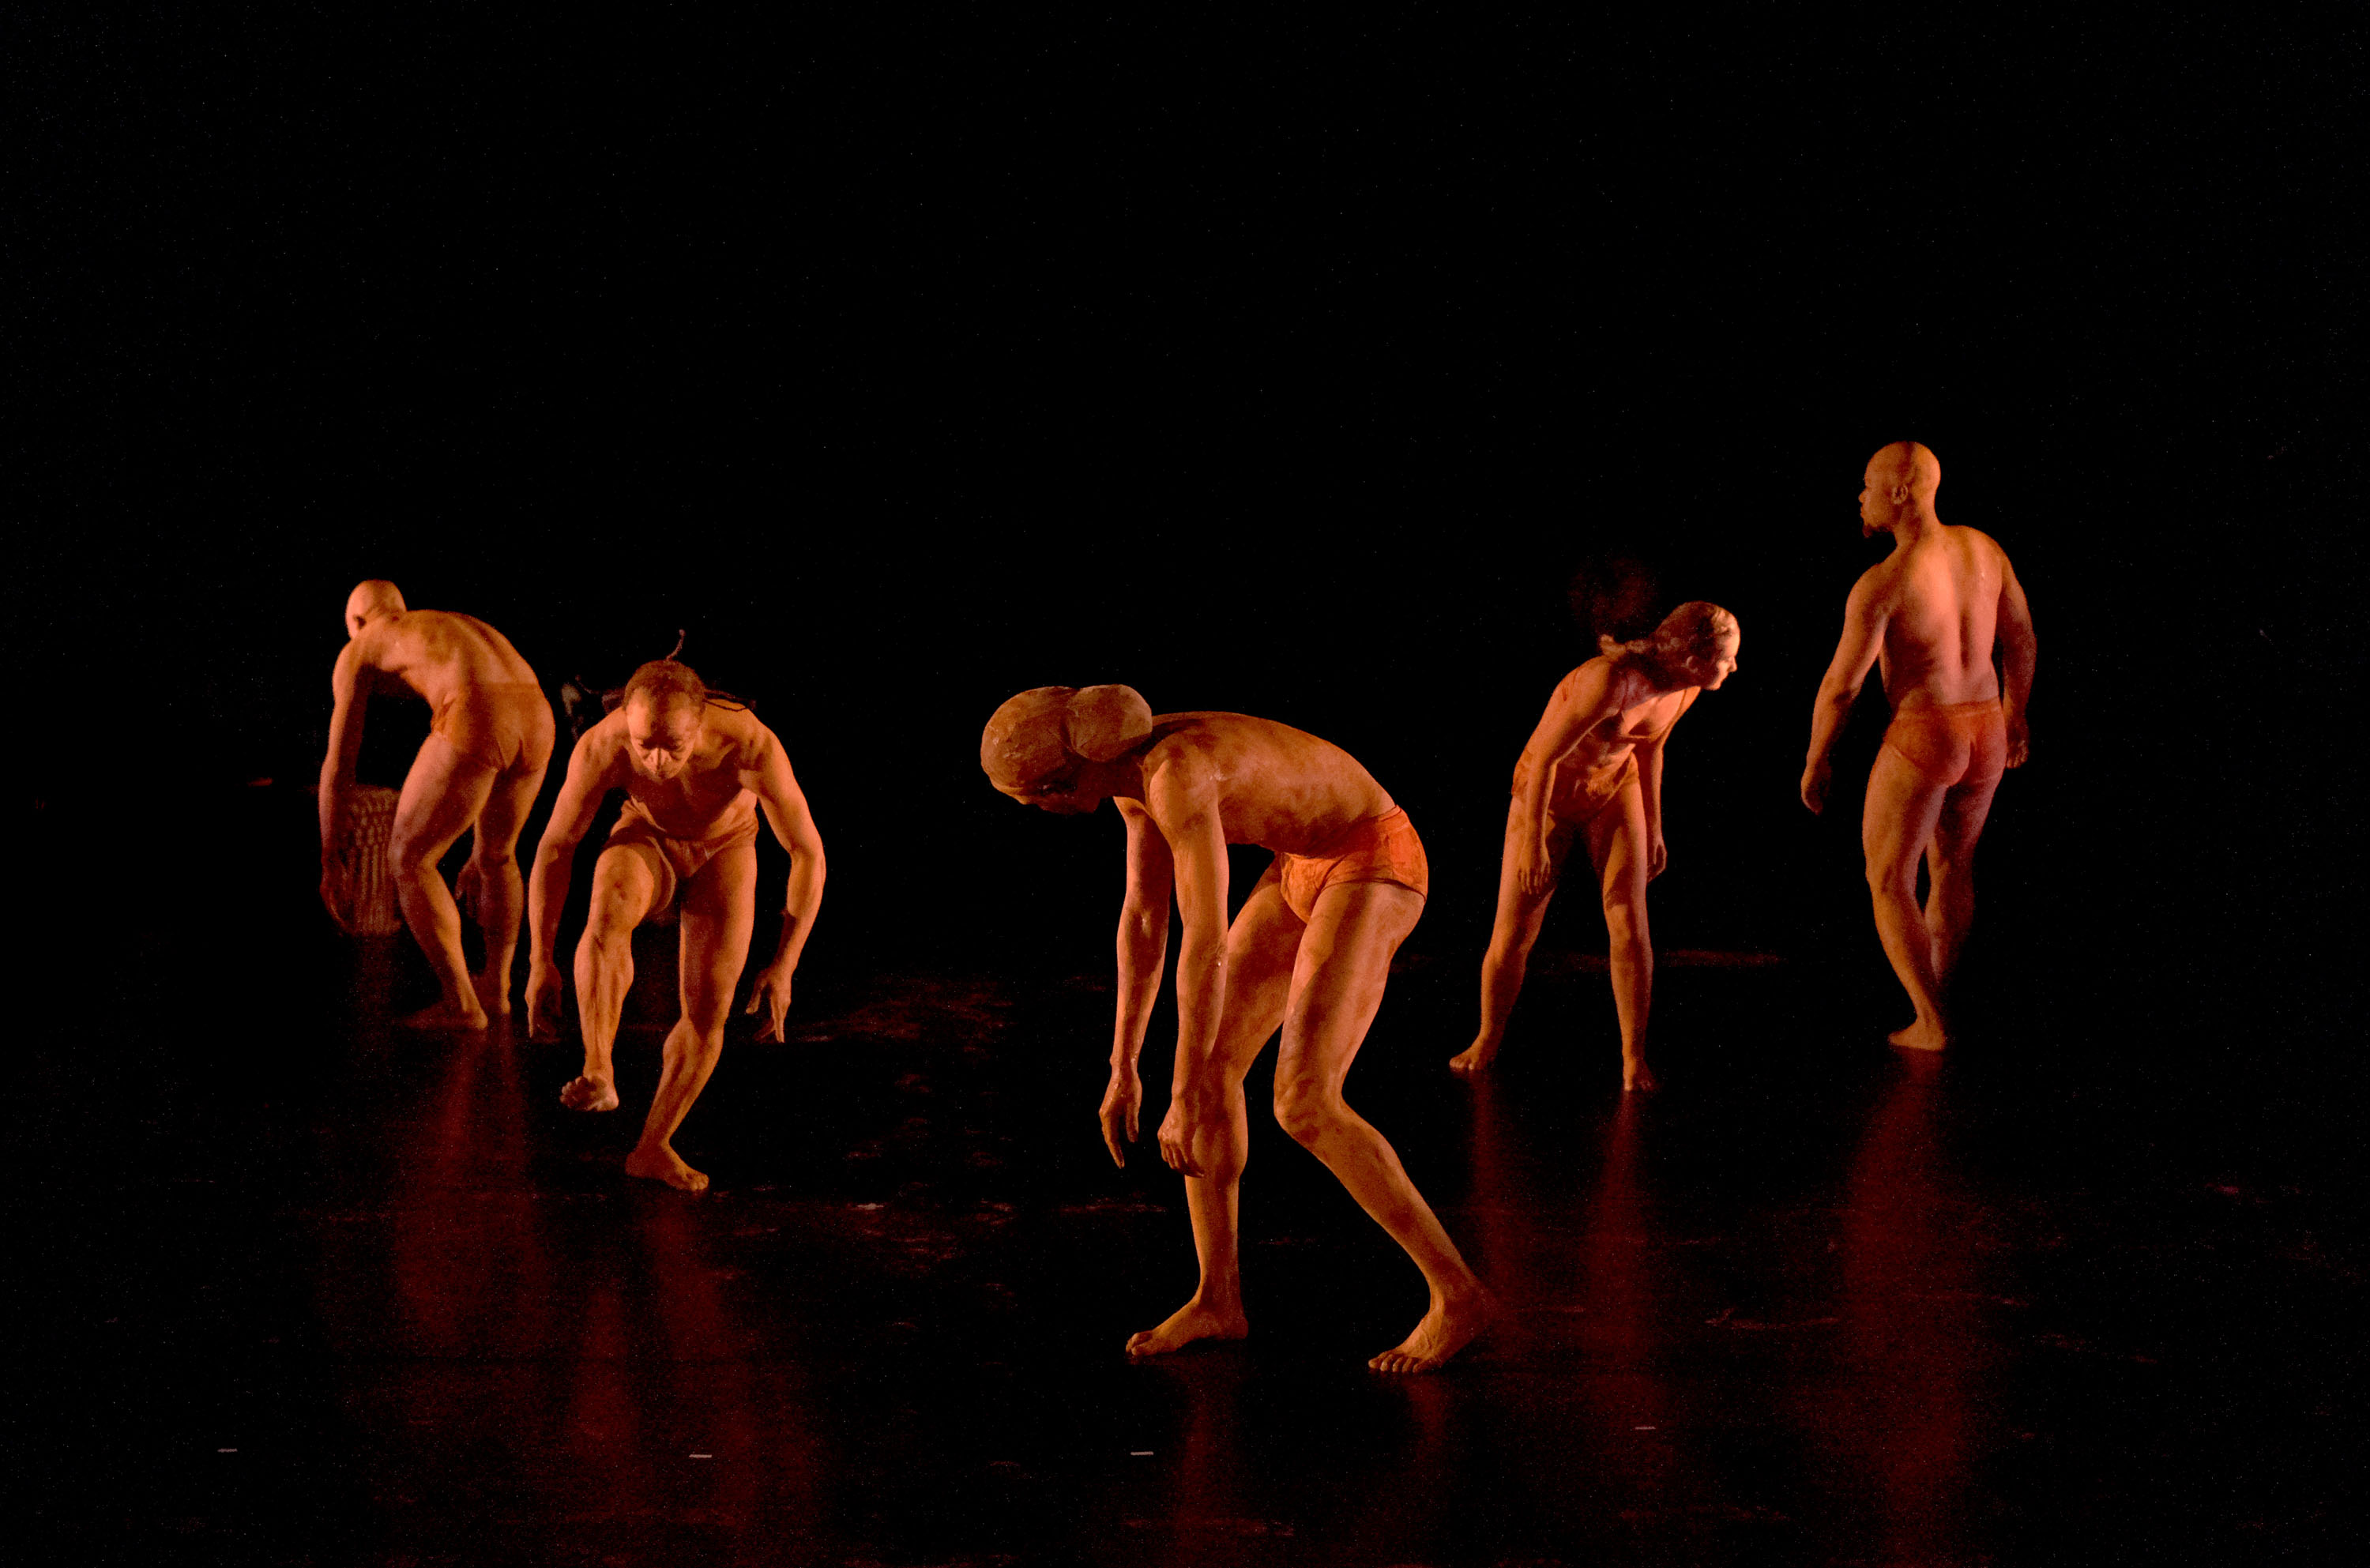 In ‘Hominideos’, from Cameroon, six dancers and musicians, their bodies covered with white clay, go on a journey back to nature, to the cradle of man. Choreographer Merlin Nyakam found his inspiration in the poem ‘In The Cradle of Humankind’ by Karen Press and the music by composer Giacinto Scelsi,’ Four Pieces Each in One Tone’. Image: John Hogg